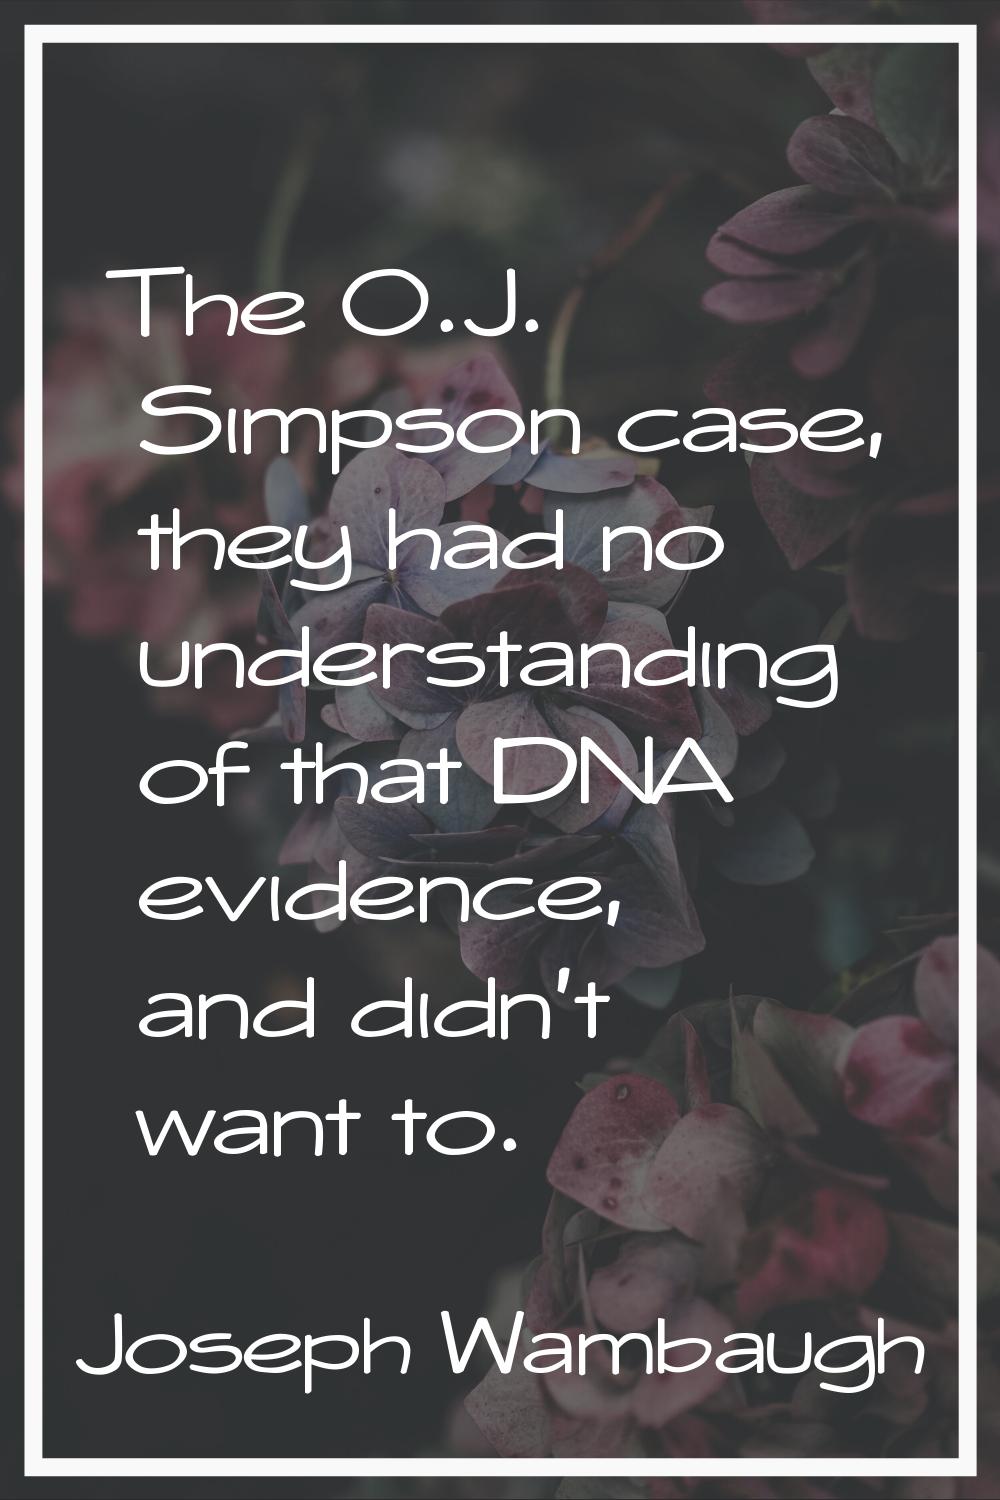 The O.J. Simpson case, they had no understanding of that DNA evidence, and didn't want to.